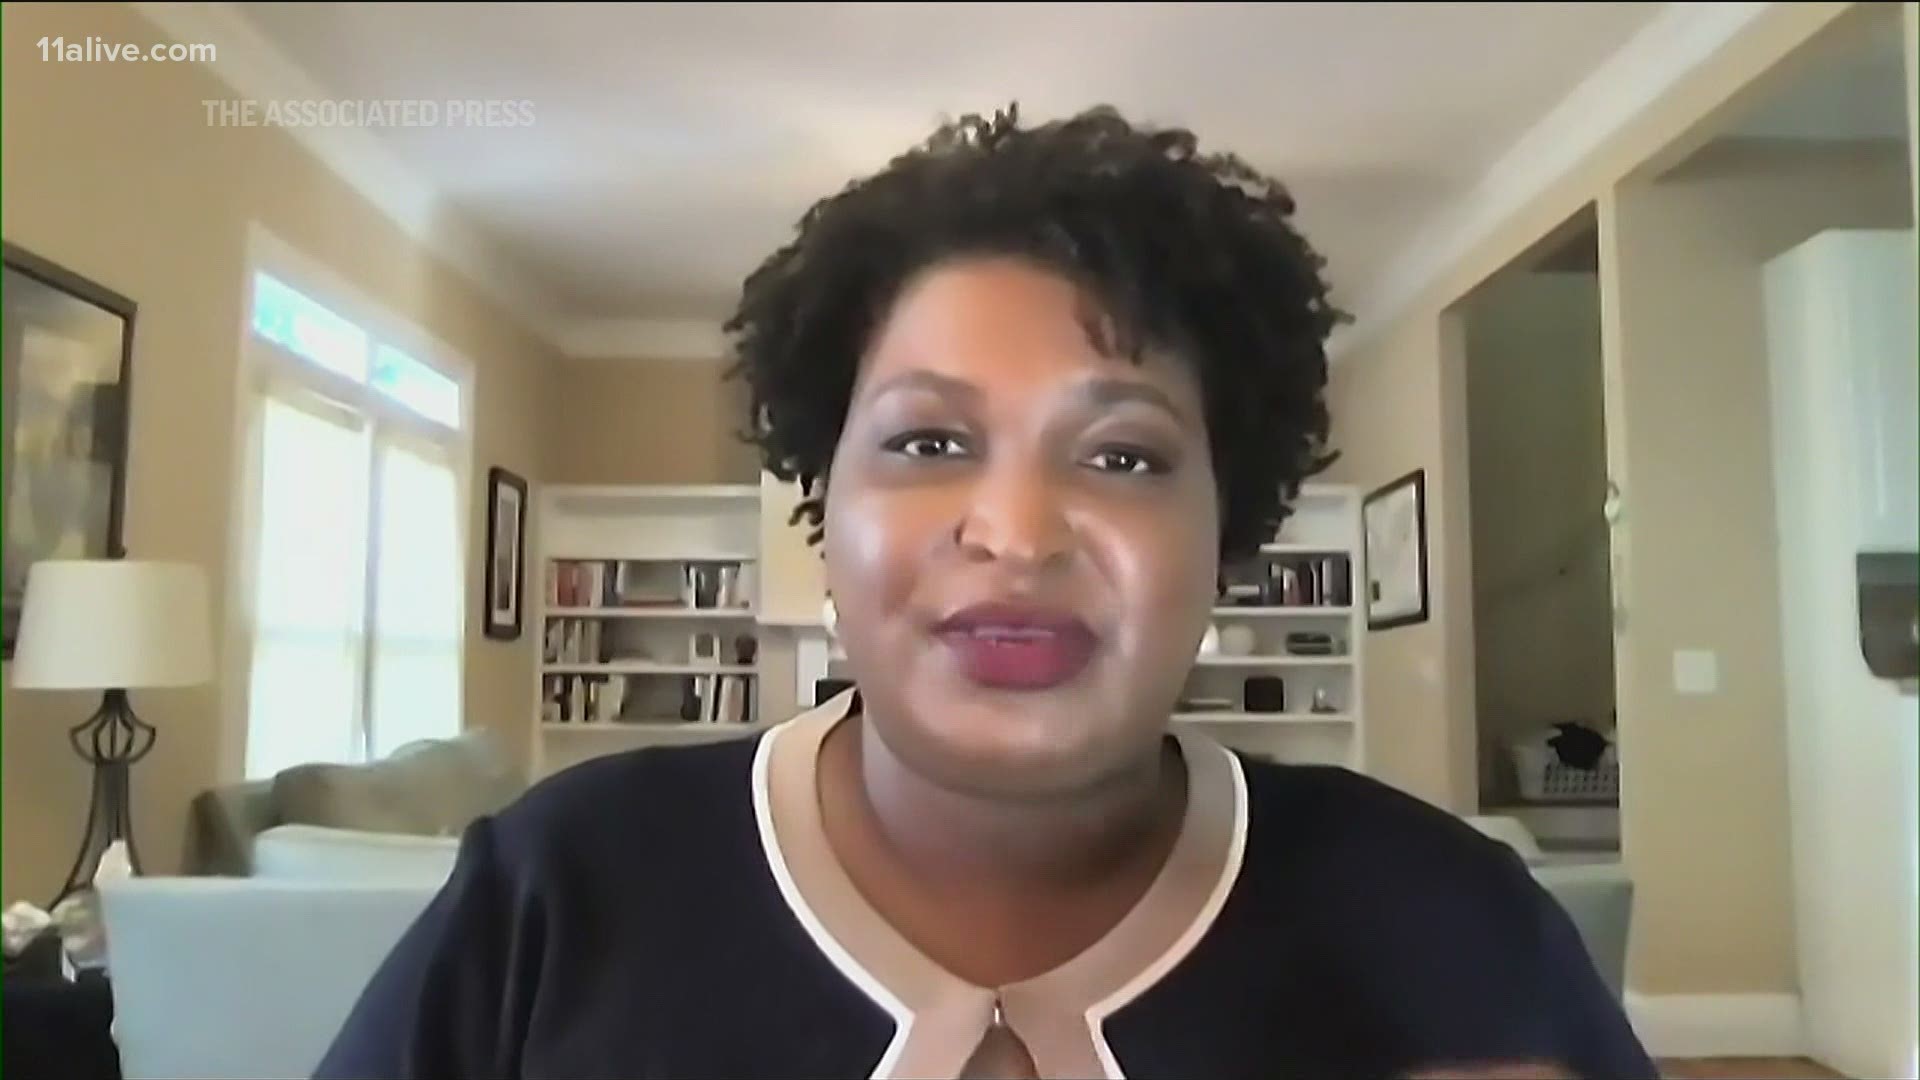 Many people credit Stacey Abrams with getting Georgians registered to vote - to the point of naming a day after her. But she's directing the credit elsewhere.